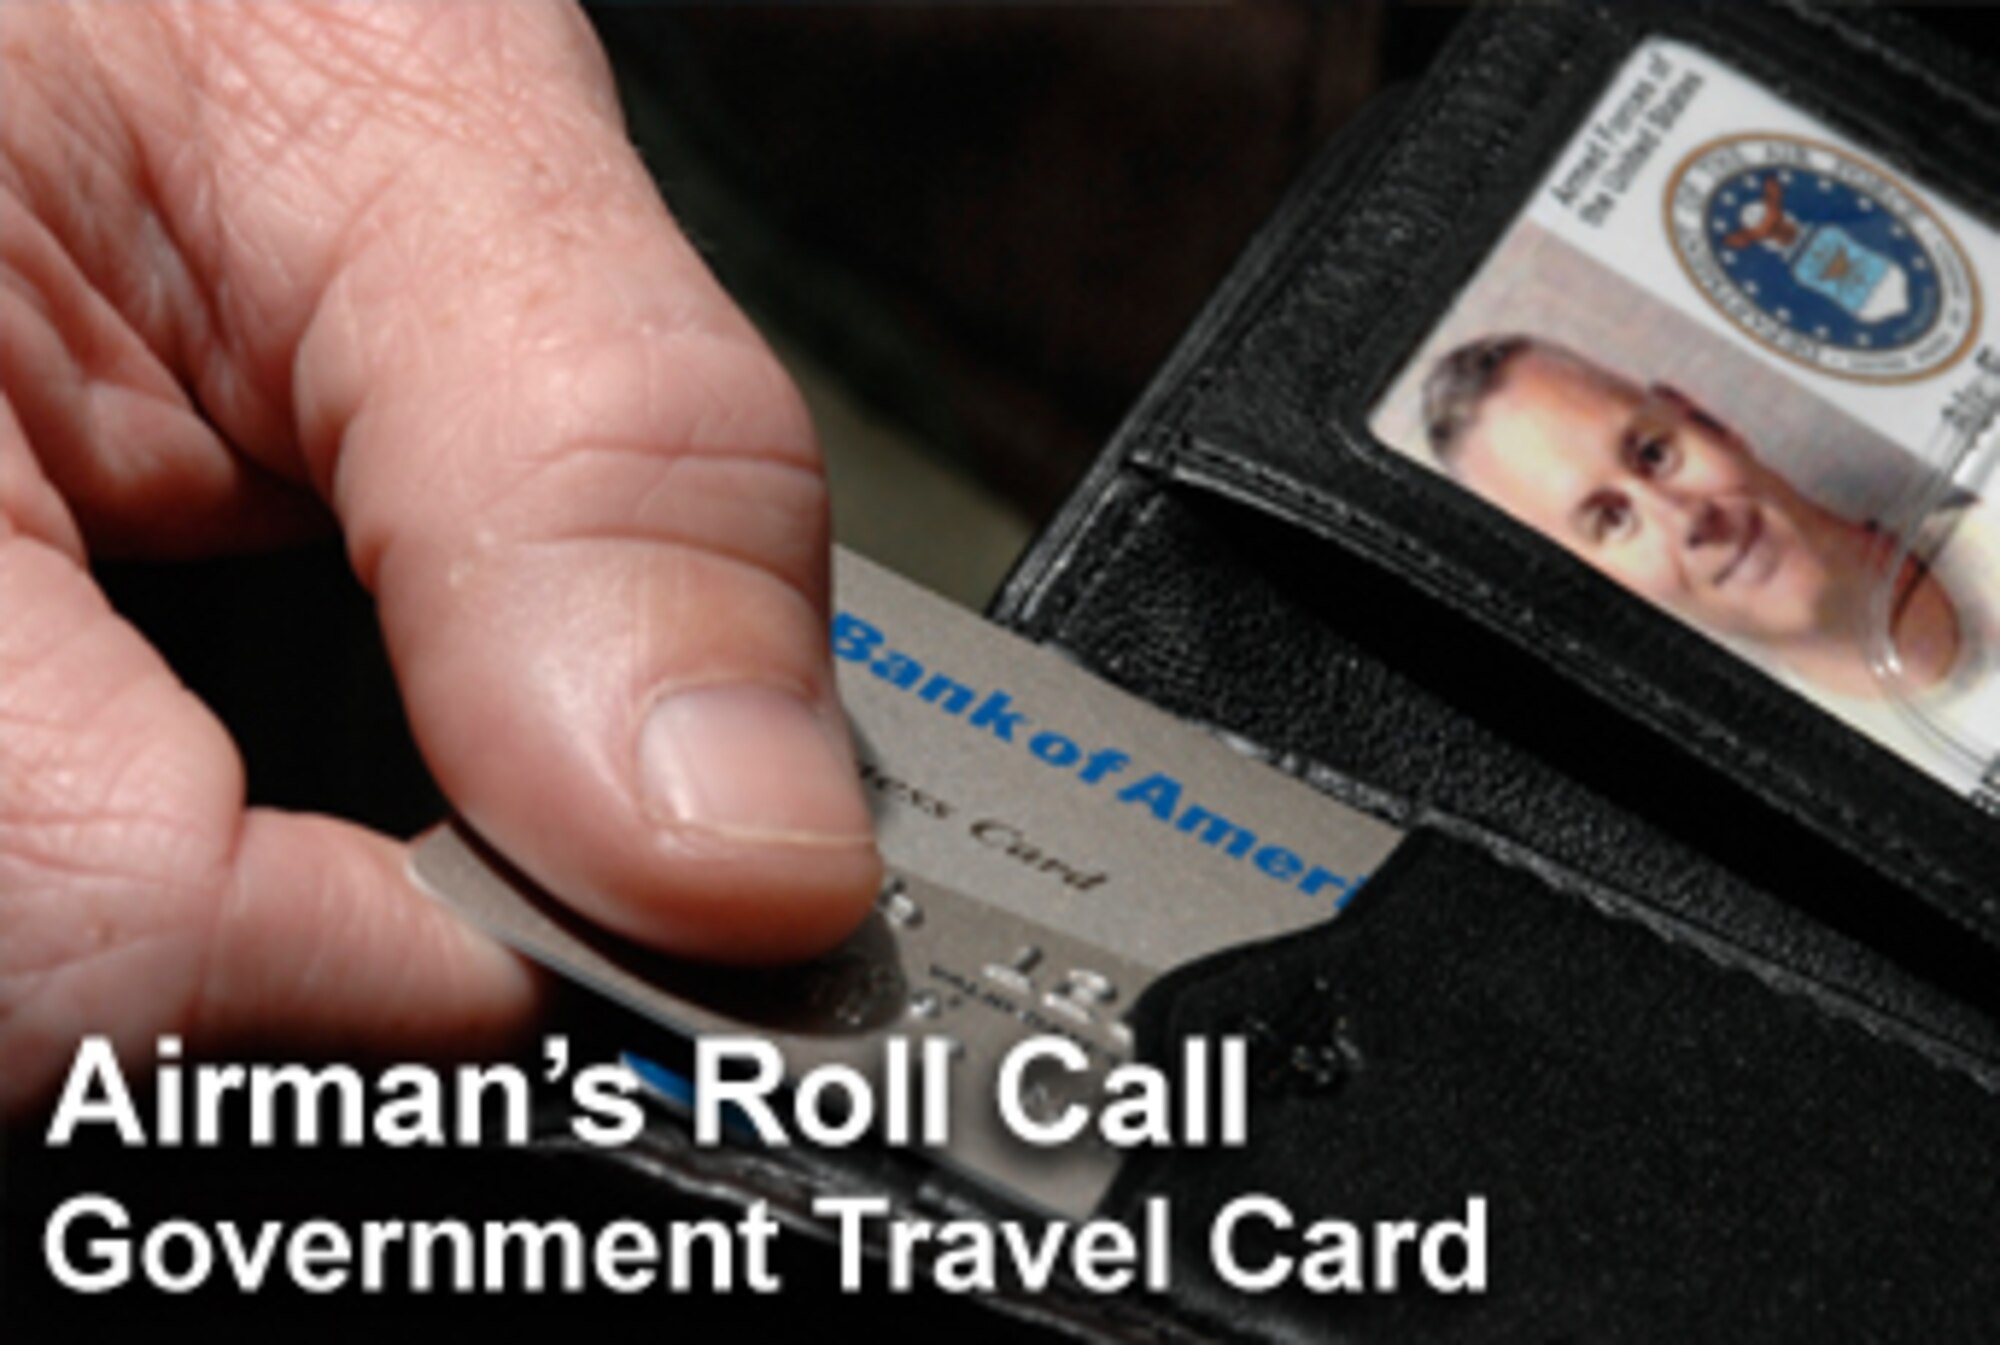 dhs government travel card training 2022